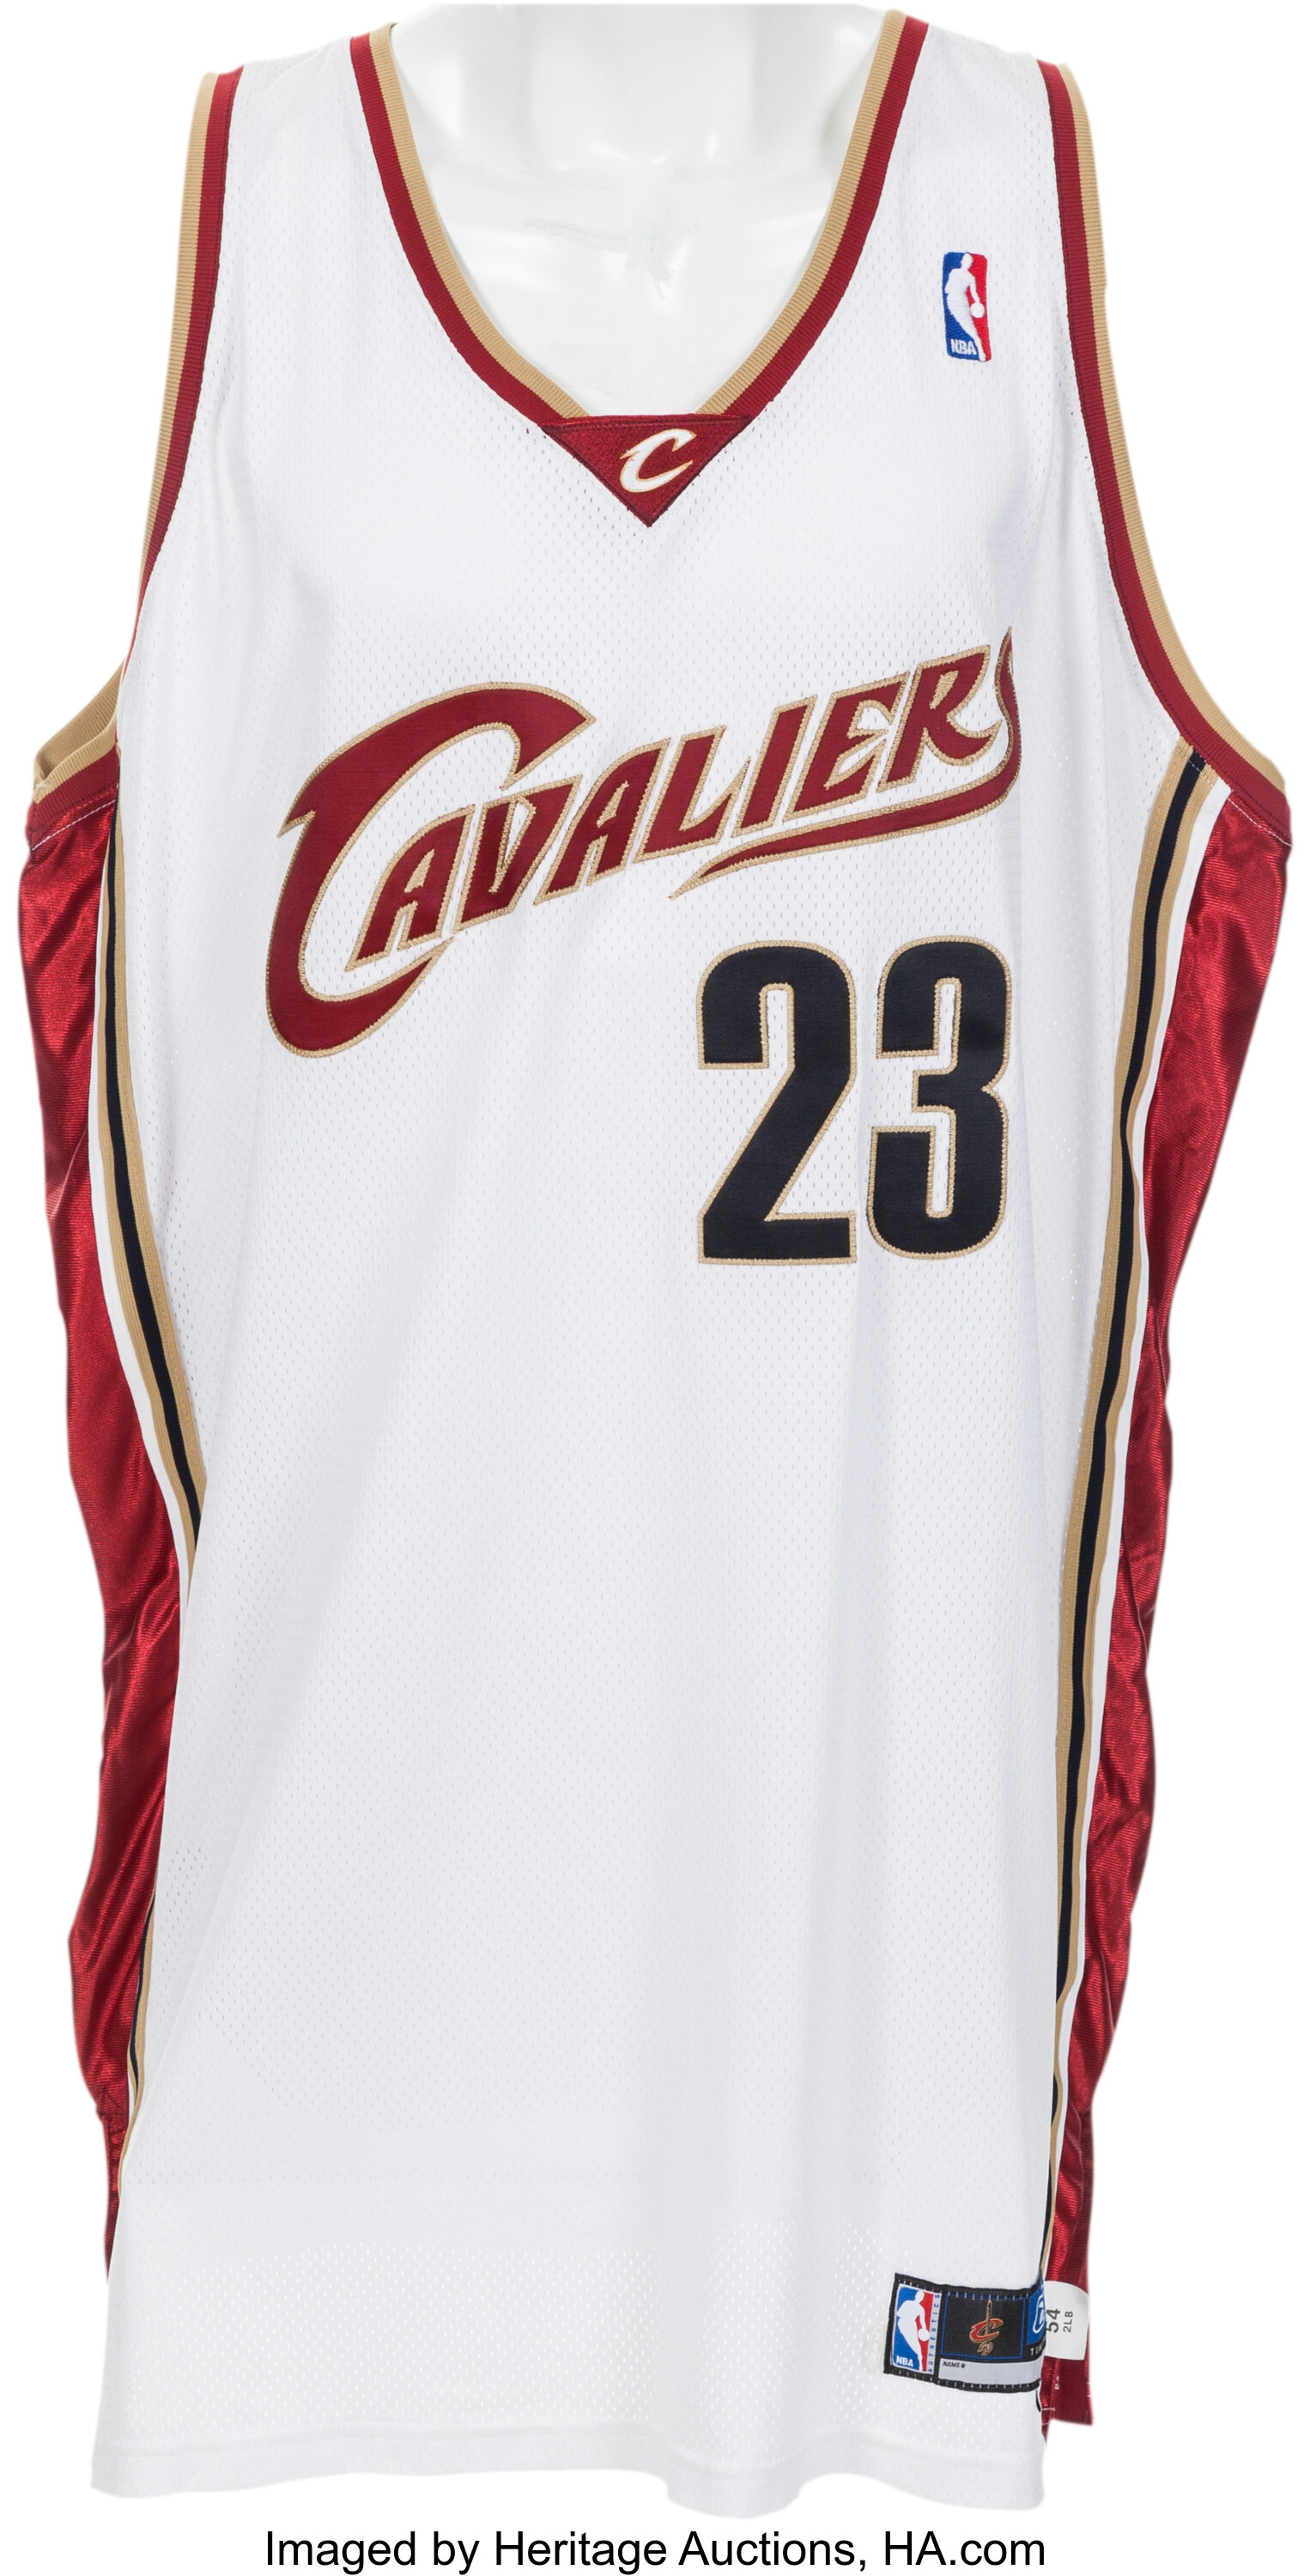 LeBron James' game-worn Finals jersey sells for $46,000